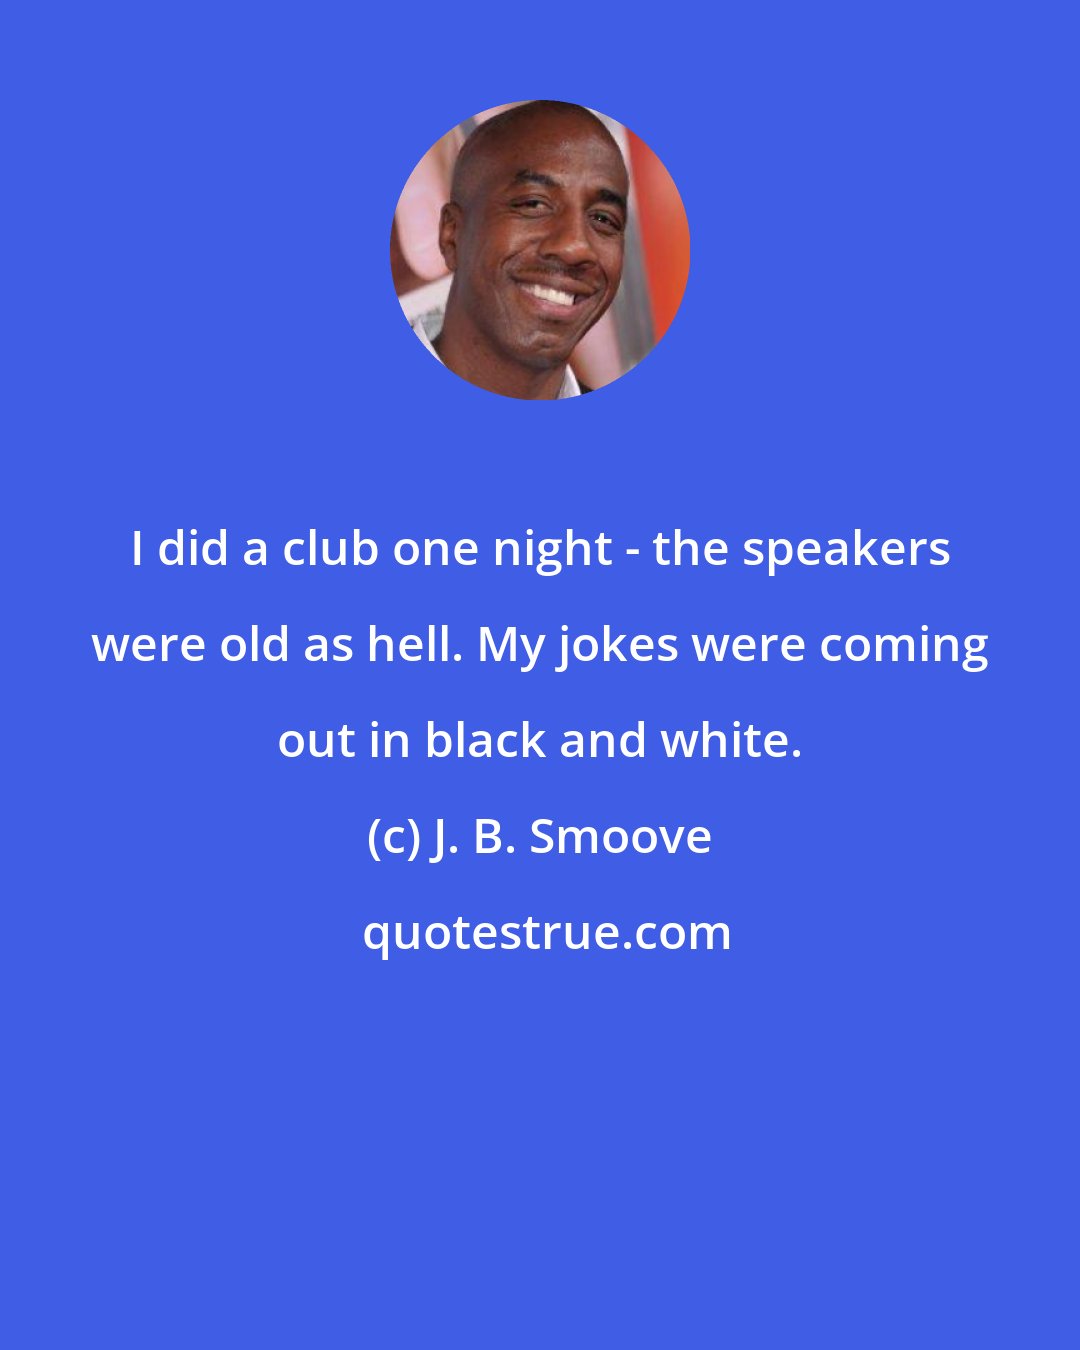 J. B. Smoove: I did a club one night - the speakers were old as hell. My jokes were coming out in black and white.